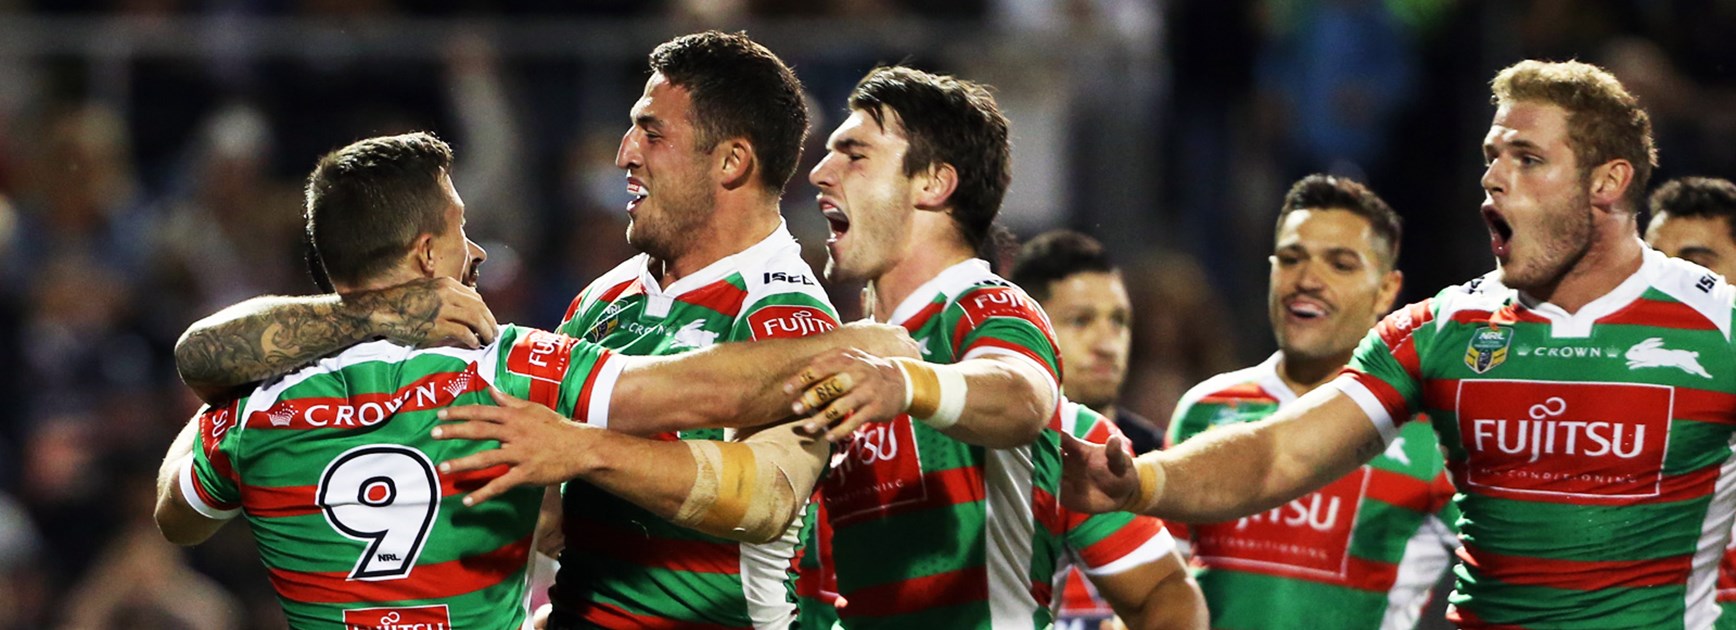 The Rabbitohs celebrate Sam Burgess's try against Penrith on Friday.